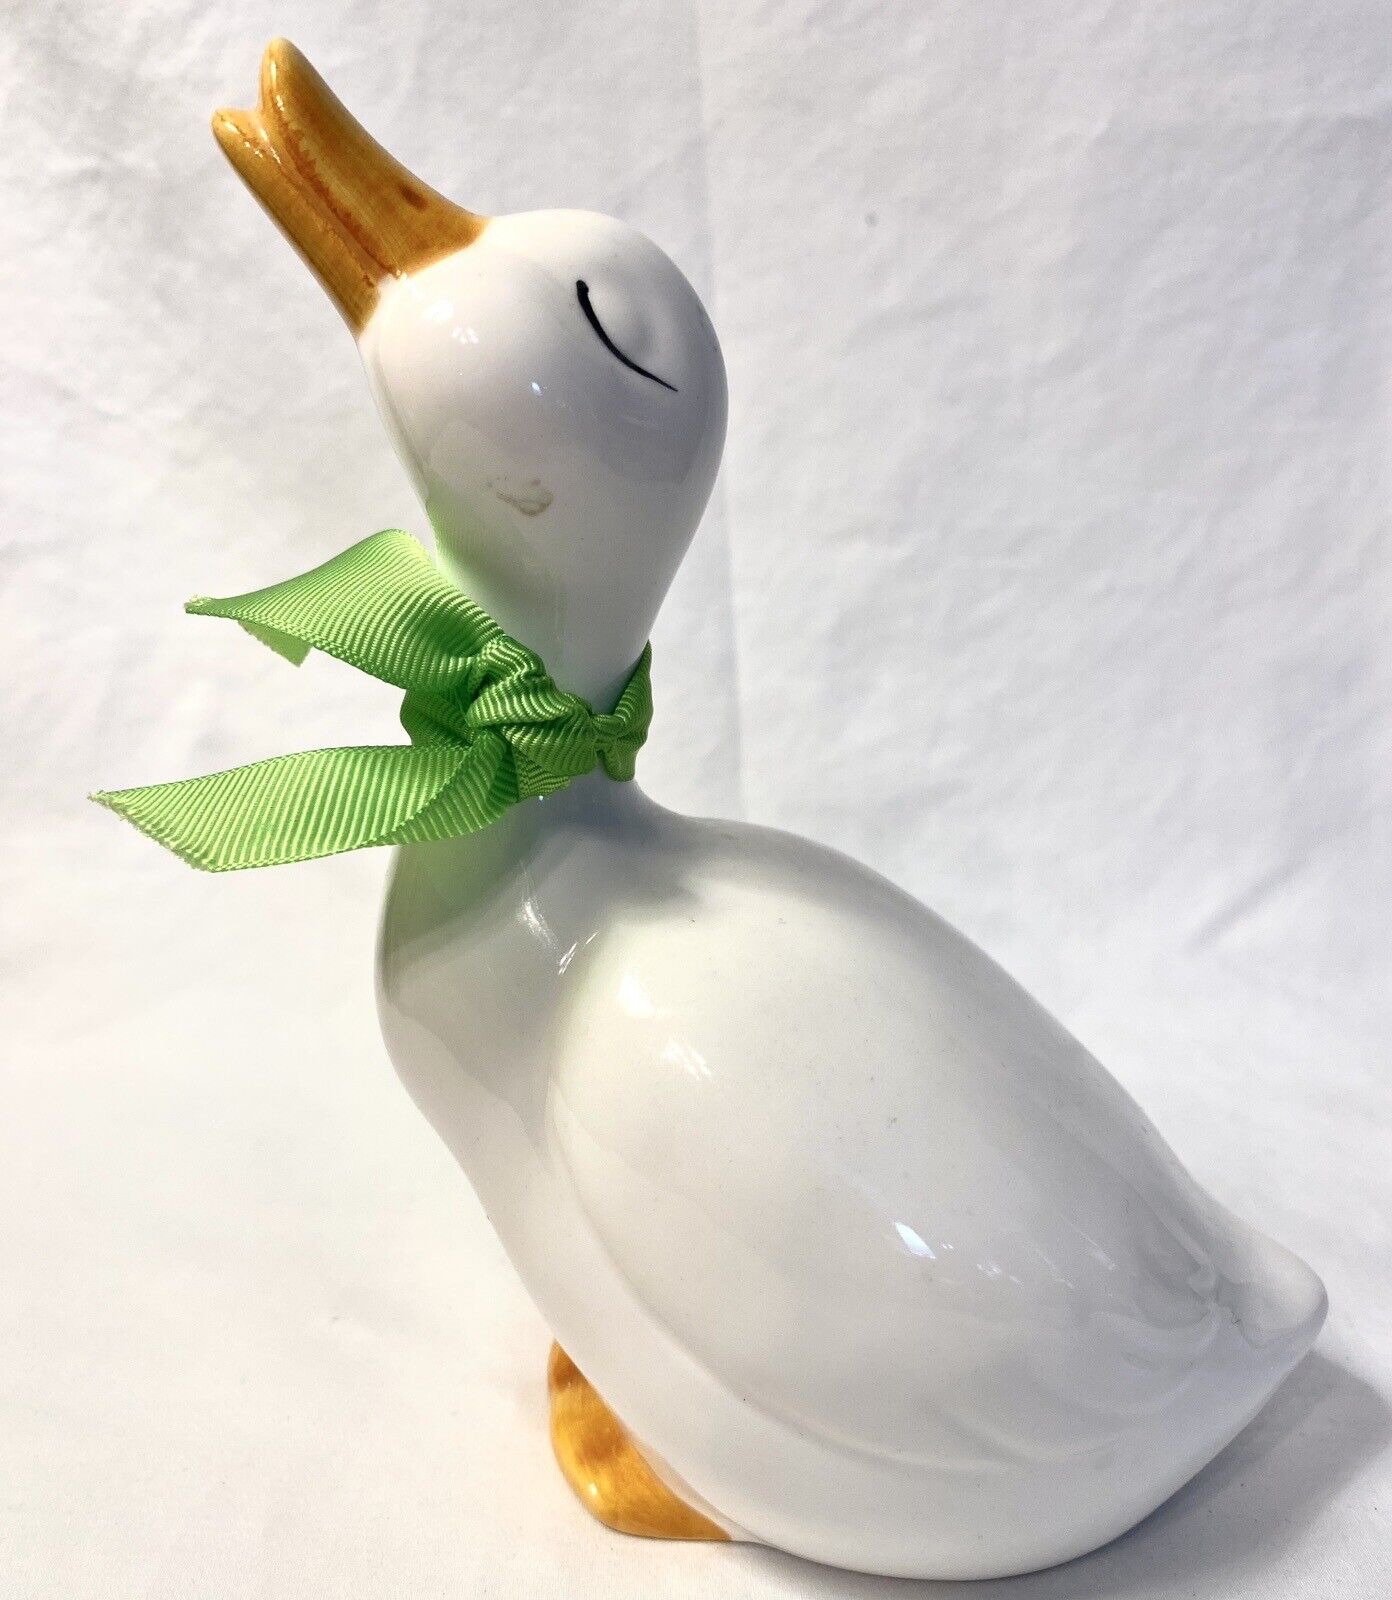 1980’s Retro VTG White Goose Duck Figurine With Grosgrain Bow 7” Inches